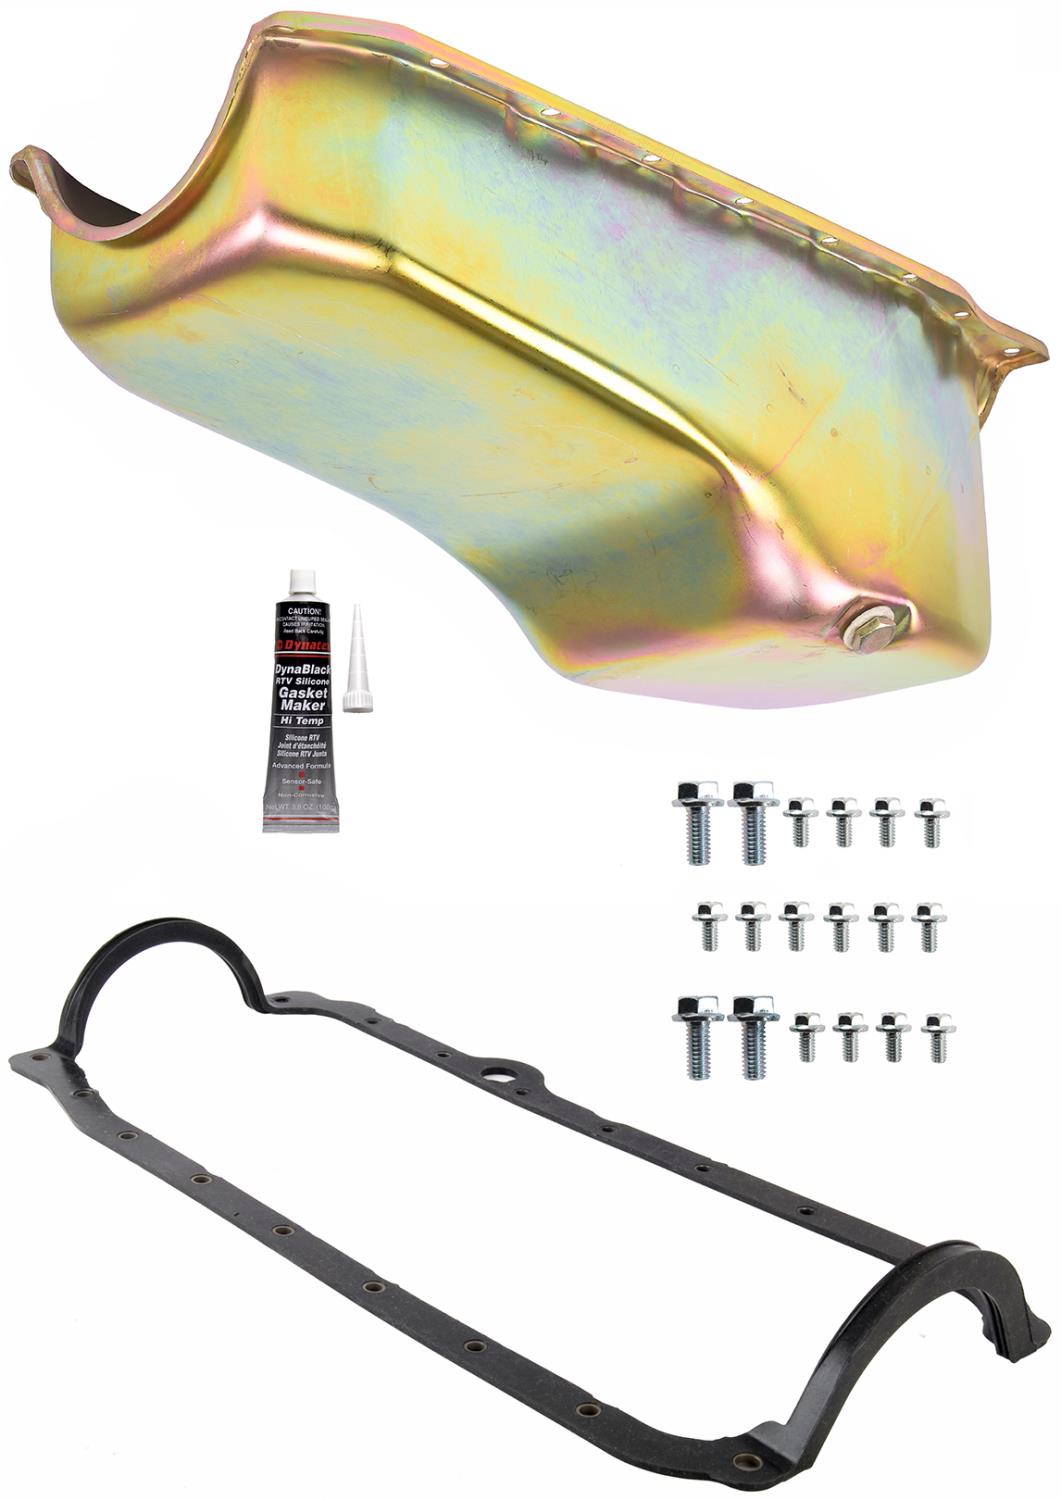 Stock-Style Replacement Oil Pan Kit for 1986-1992 Small Block Chevy w/Right Hand Dip Stick [Gold Zinc]